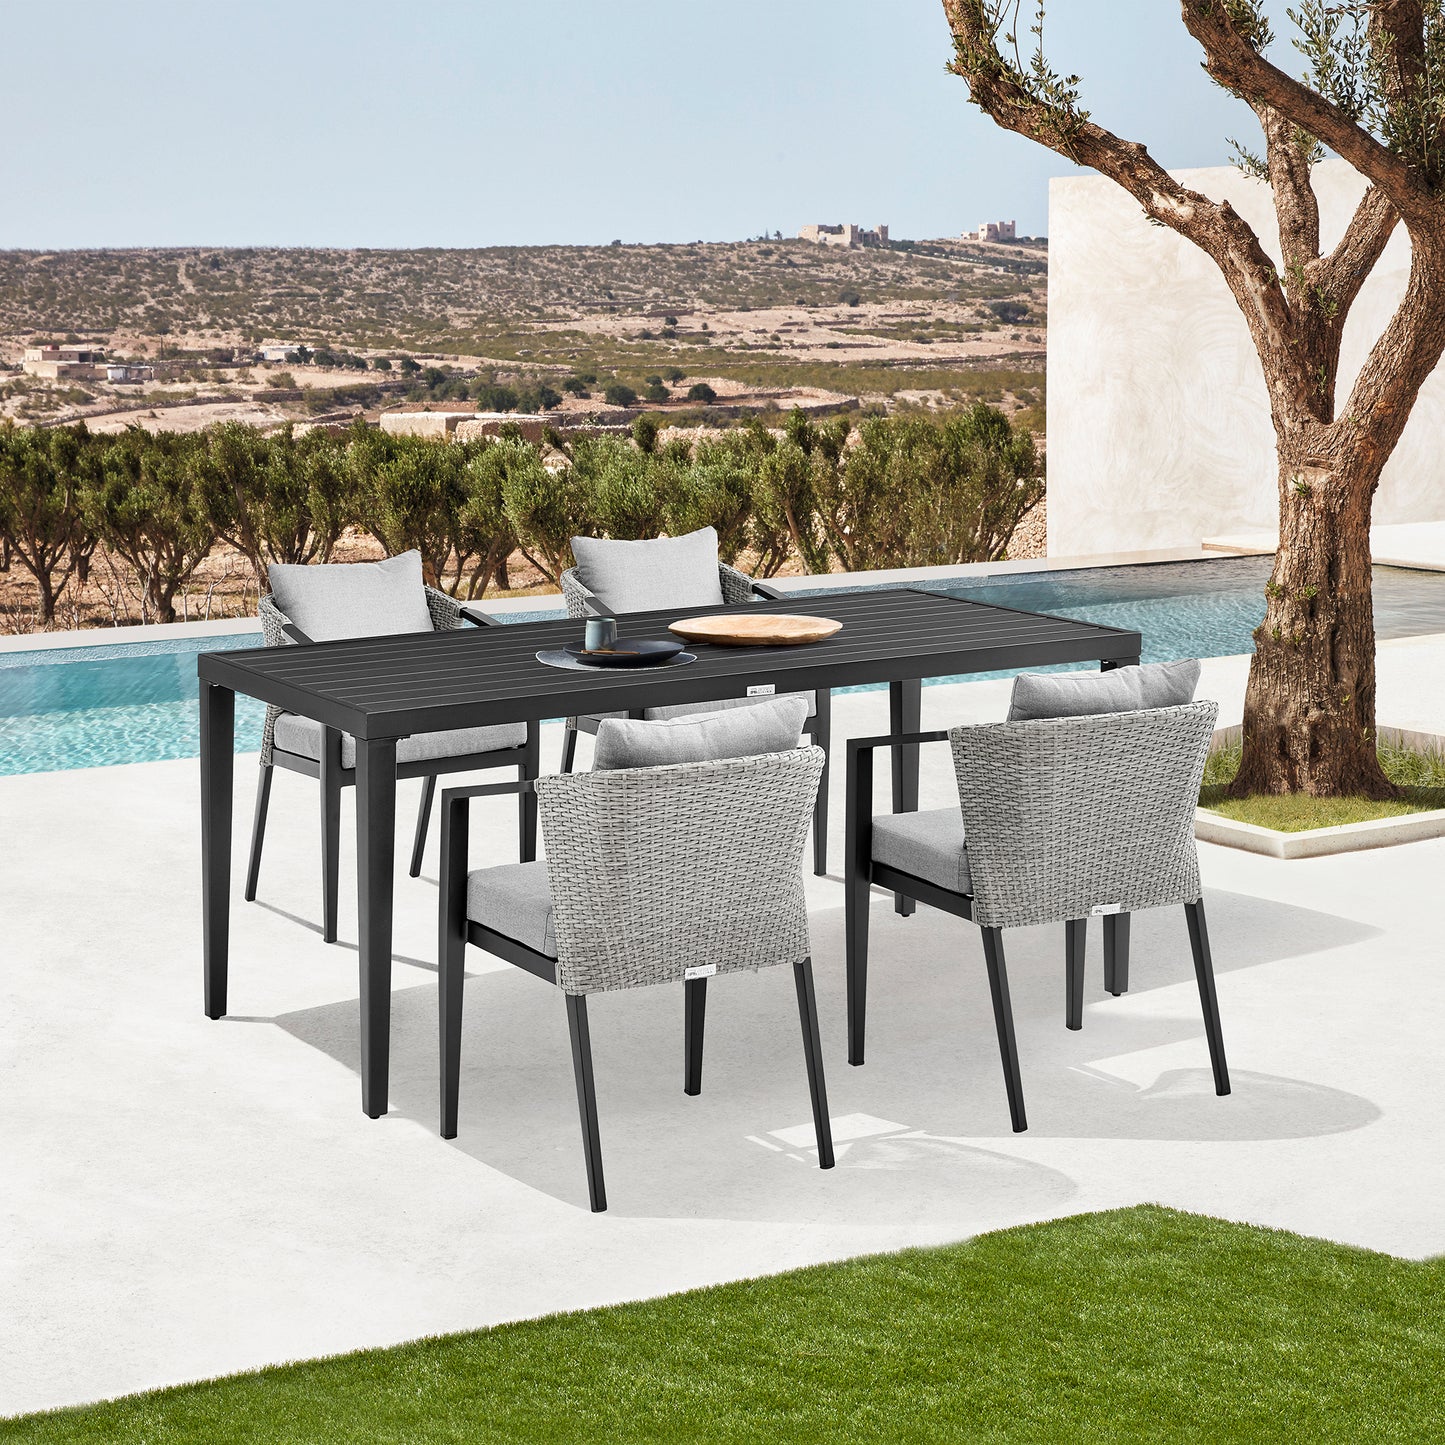 Palma Outdoor Patio 5-Piece Dining Table Set in Aluminum and Wicker with Gray Cushions